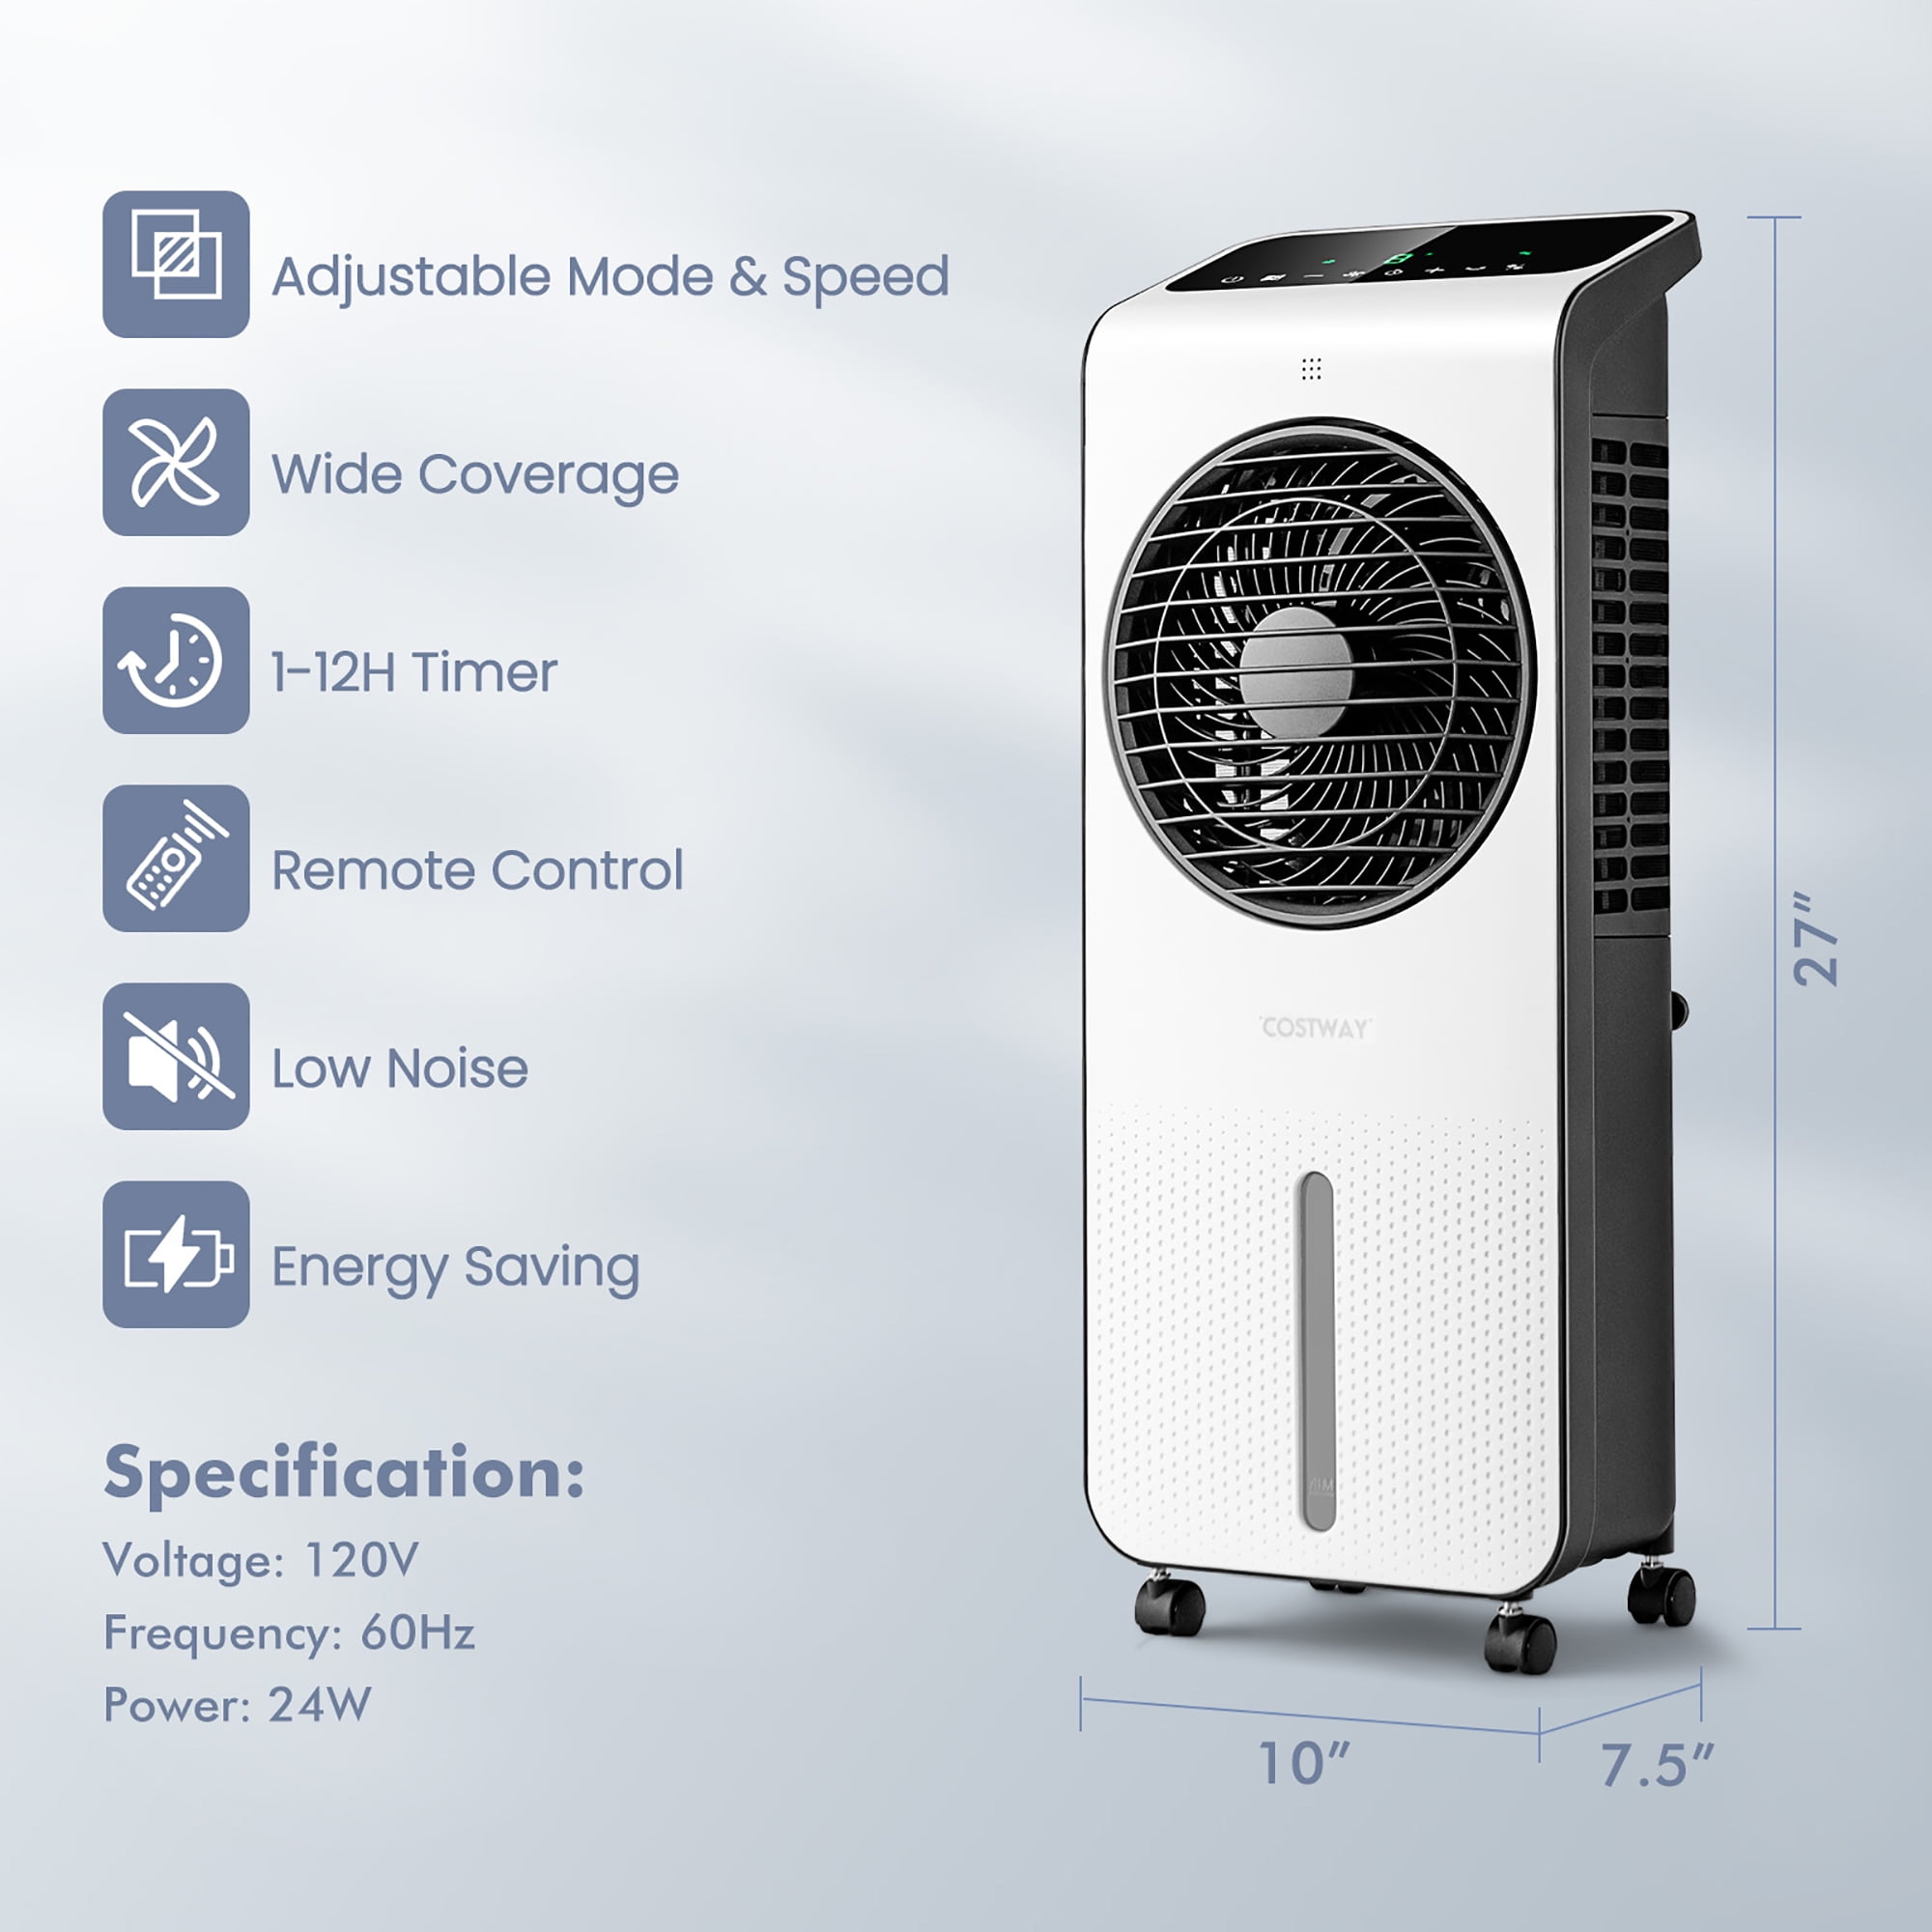 Costway 42''Portable Air Cooler 3-in-1 Cooling Tower Fan W/9H Timer - 13''x 10.5''x 42'' - White